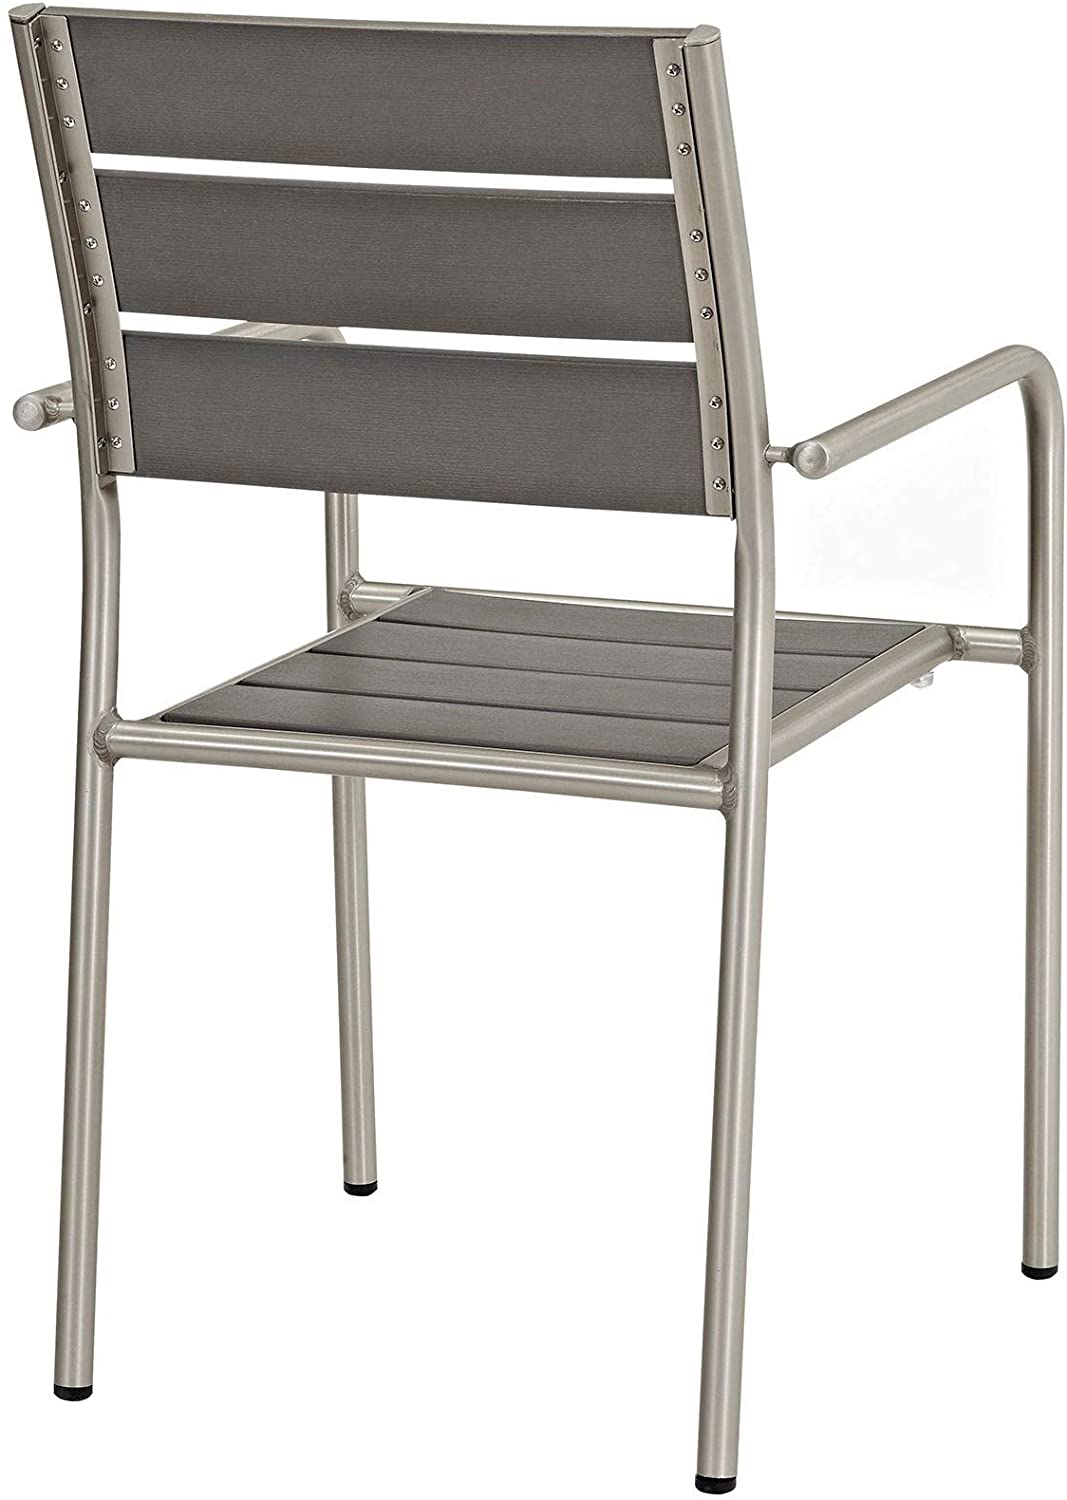 UKN Beach Grey/Plastic/Wood Outdoor Patio Dining Chair Silver Mid Century Modern Contemporary Plastic